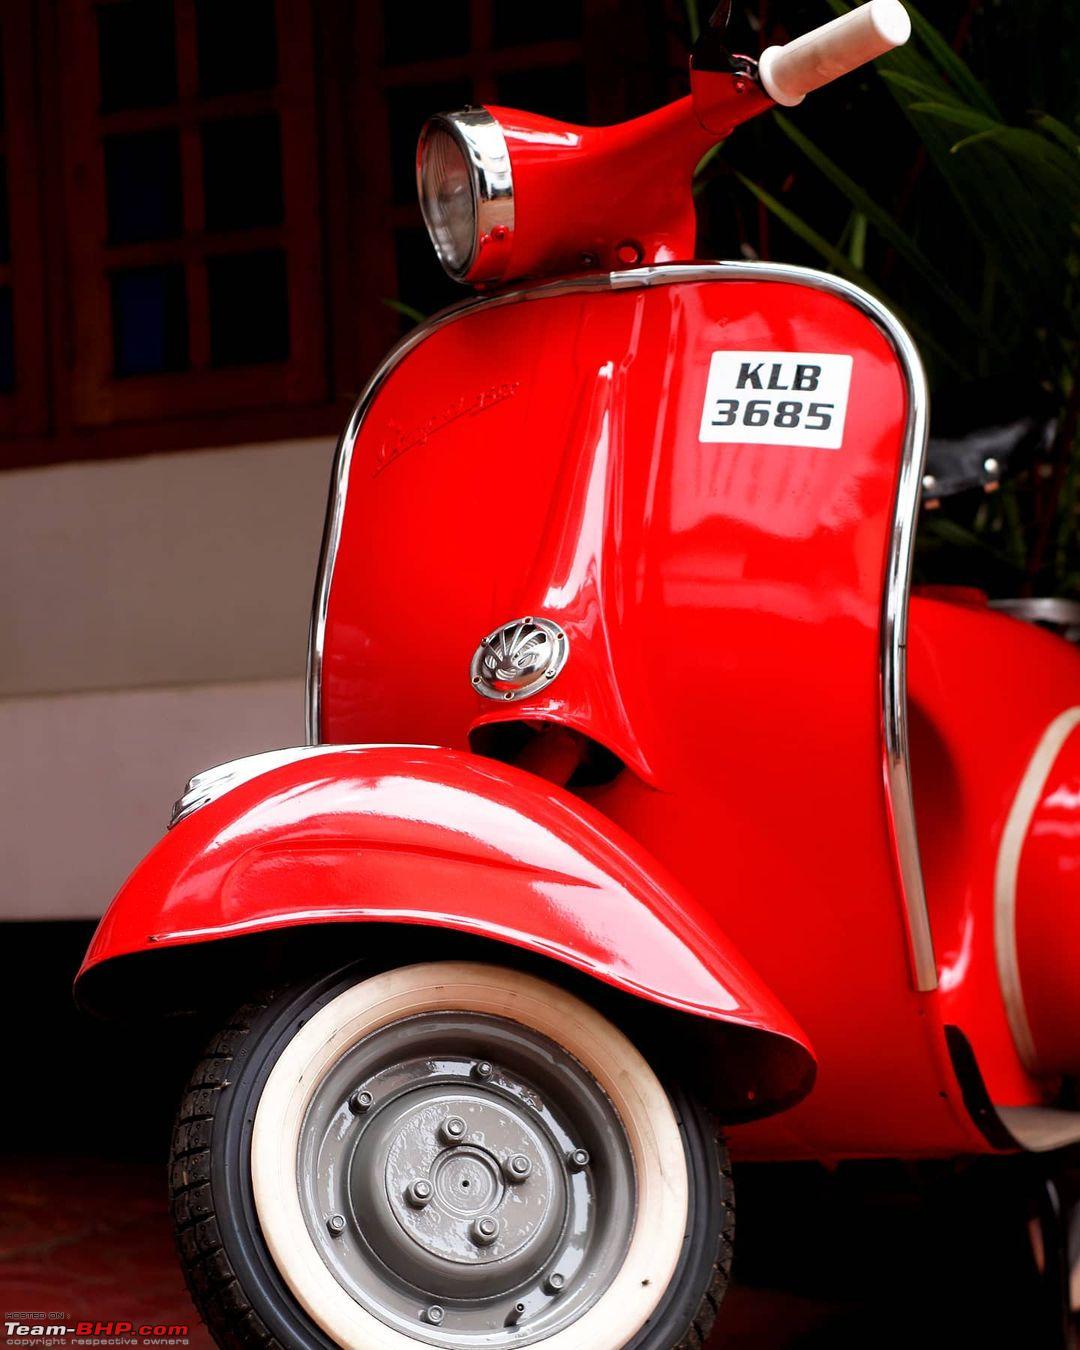 Retro-chic restored scooters : New trend down south - Team-BHP